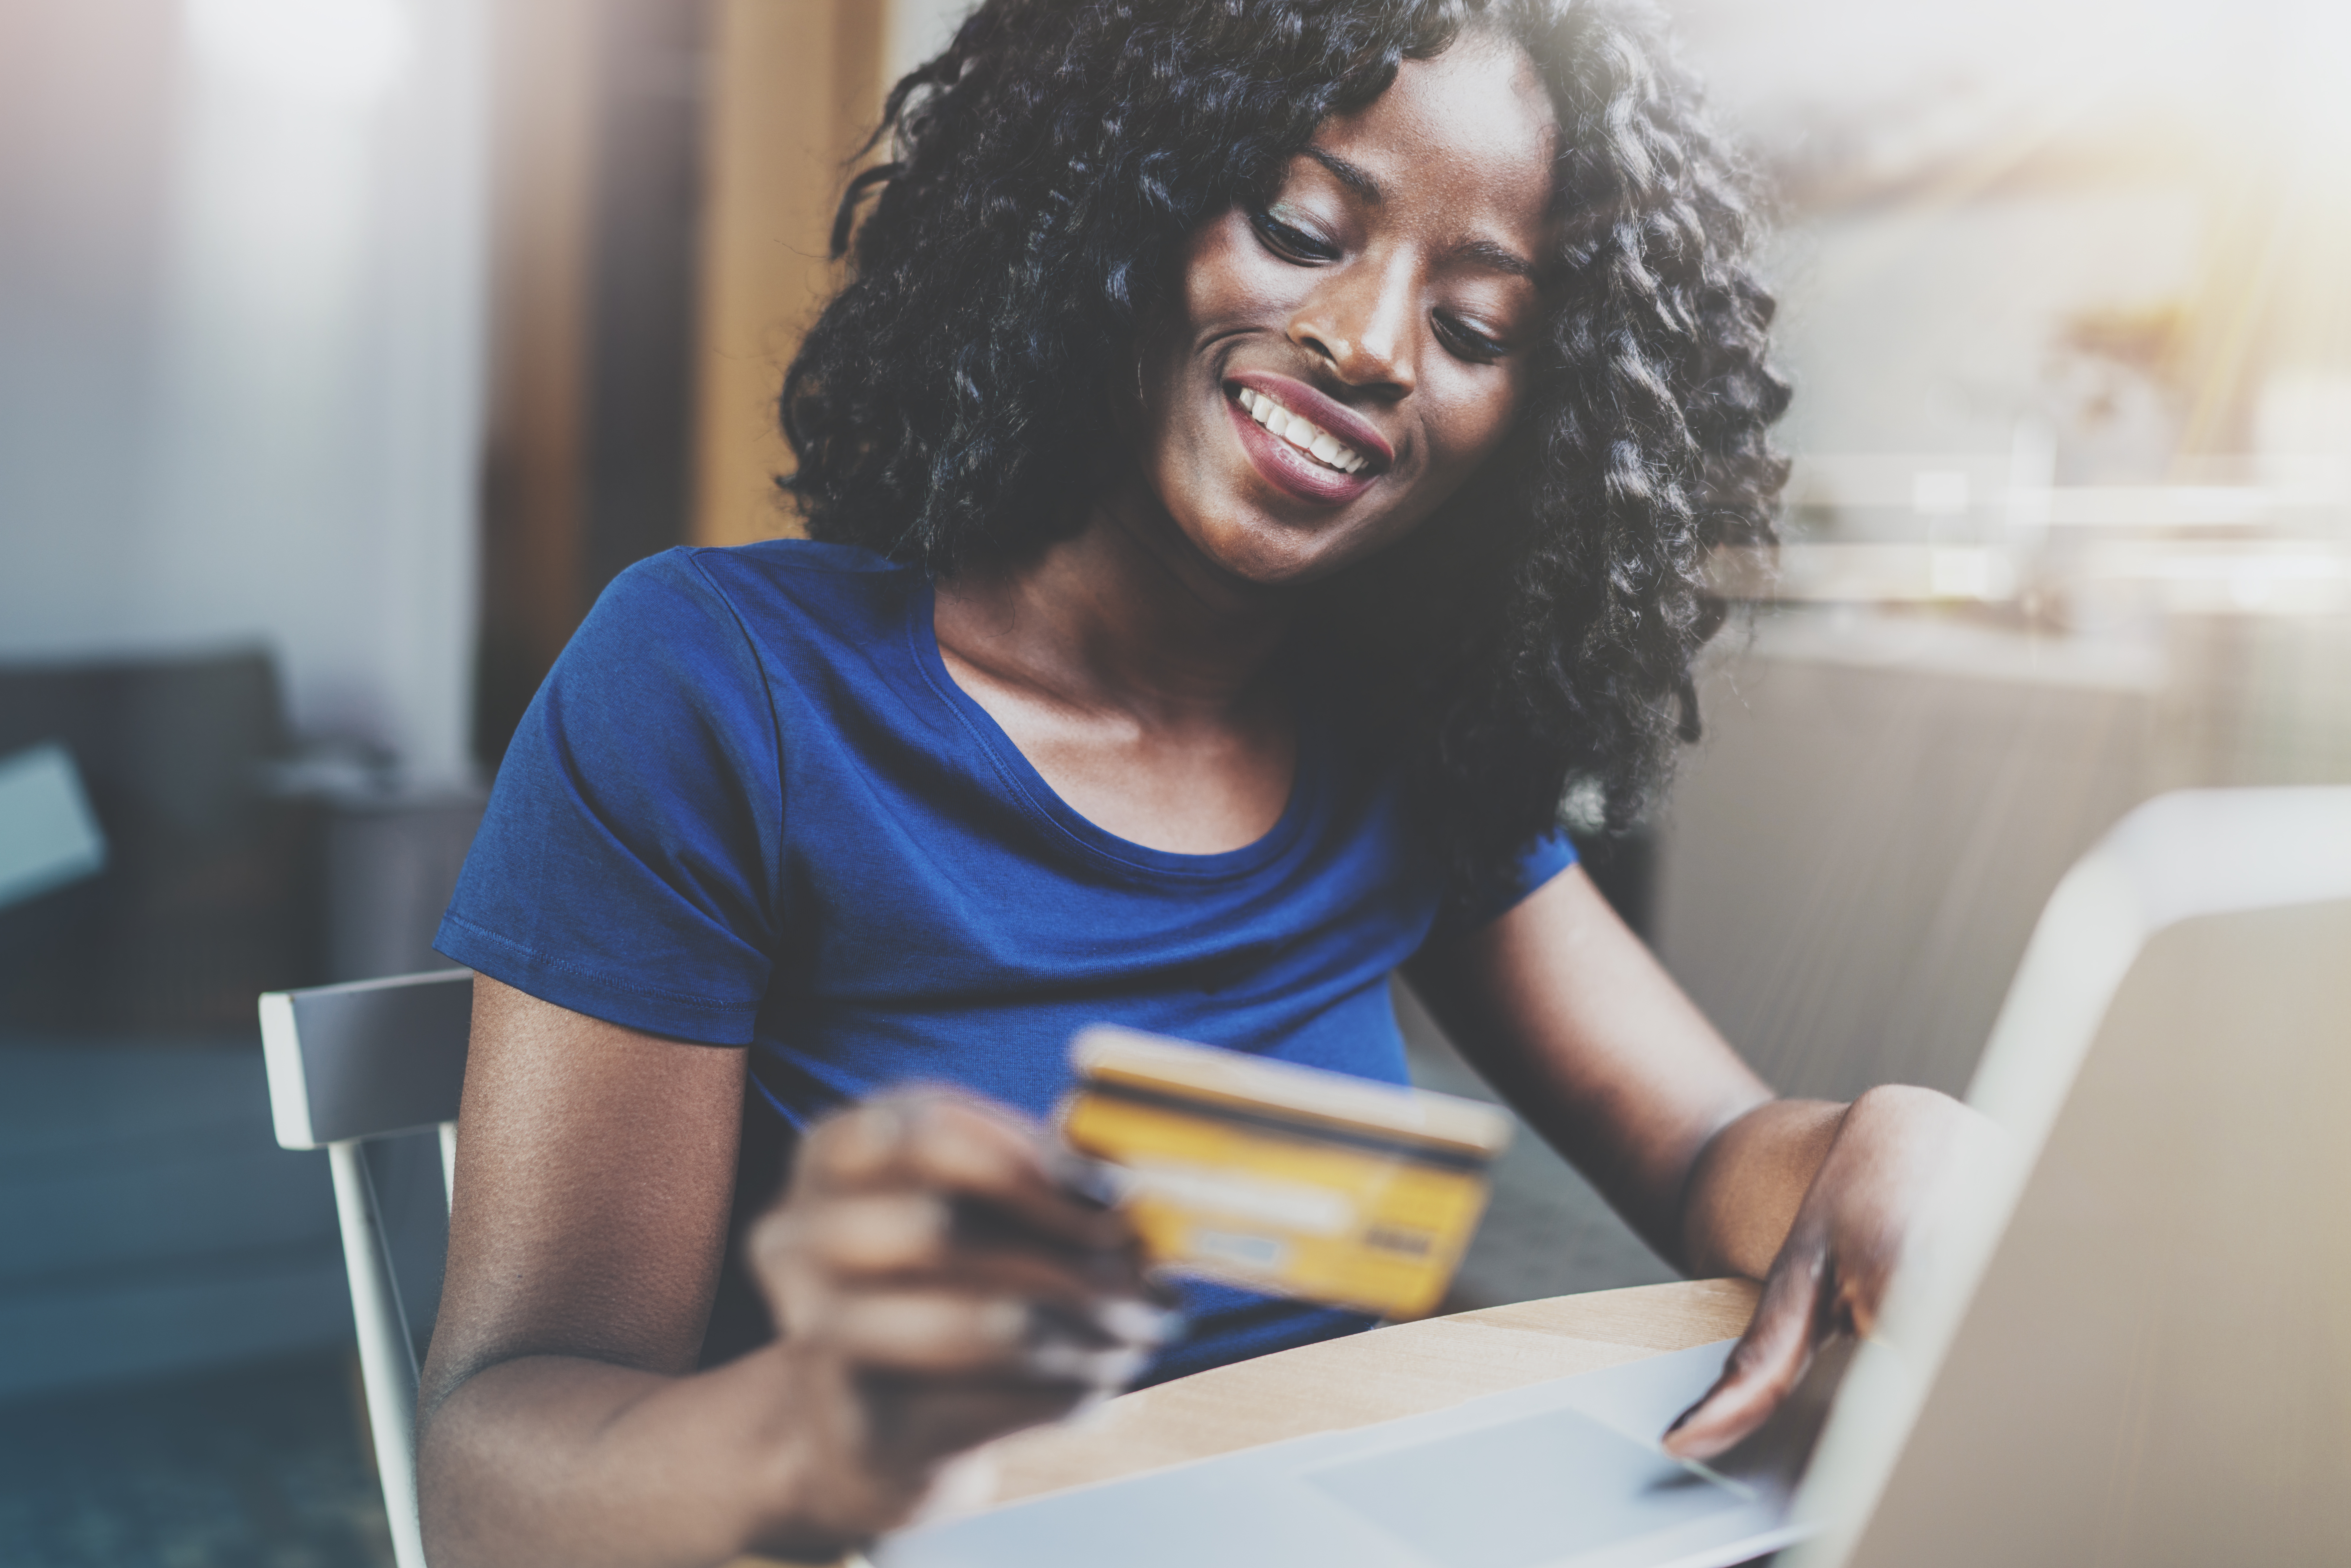 A happy African American woman uses her credit card to make an online purchase after learning how to apply for a credit card and get approved.